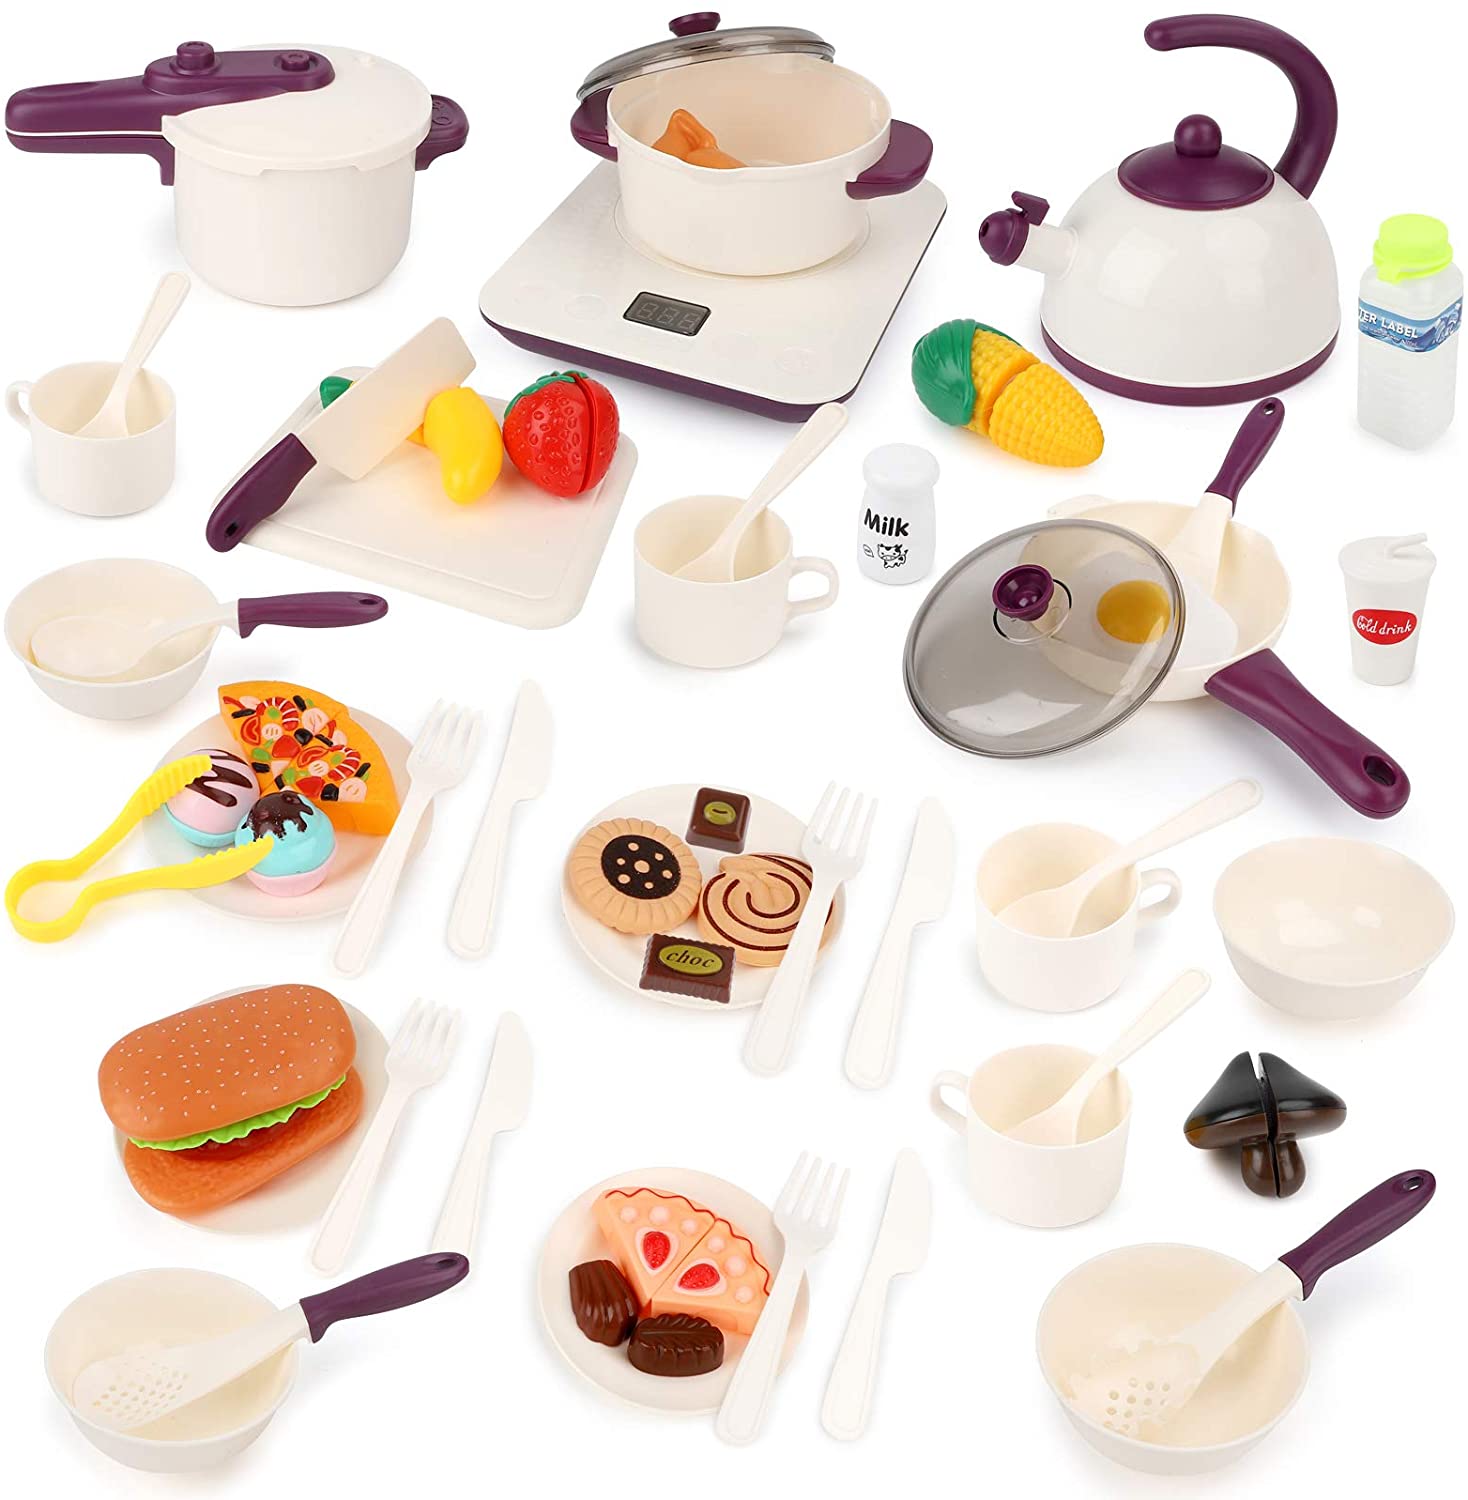 Hot New Products Toys Yard Games - BeebeeRun Kids Kitchen Pretend Play Toys 61PCS Cooking Set for Toddlers Cookware Pots and Pans Playset, Cooking Utensils, Toy Cutlery, Cutting Play Food – ...